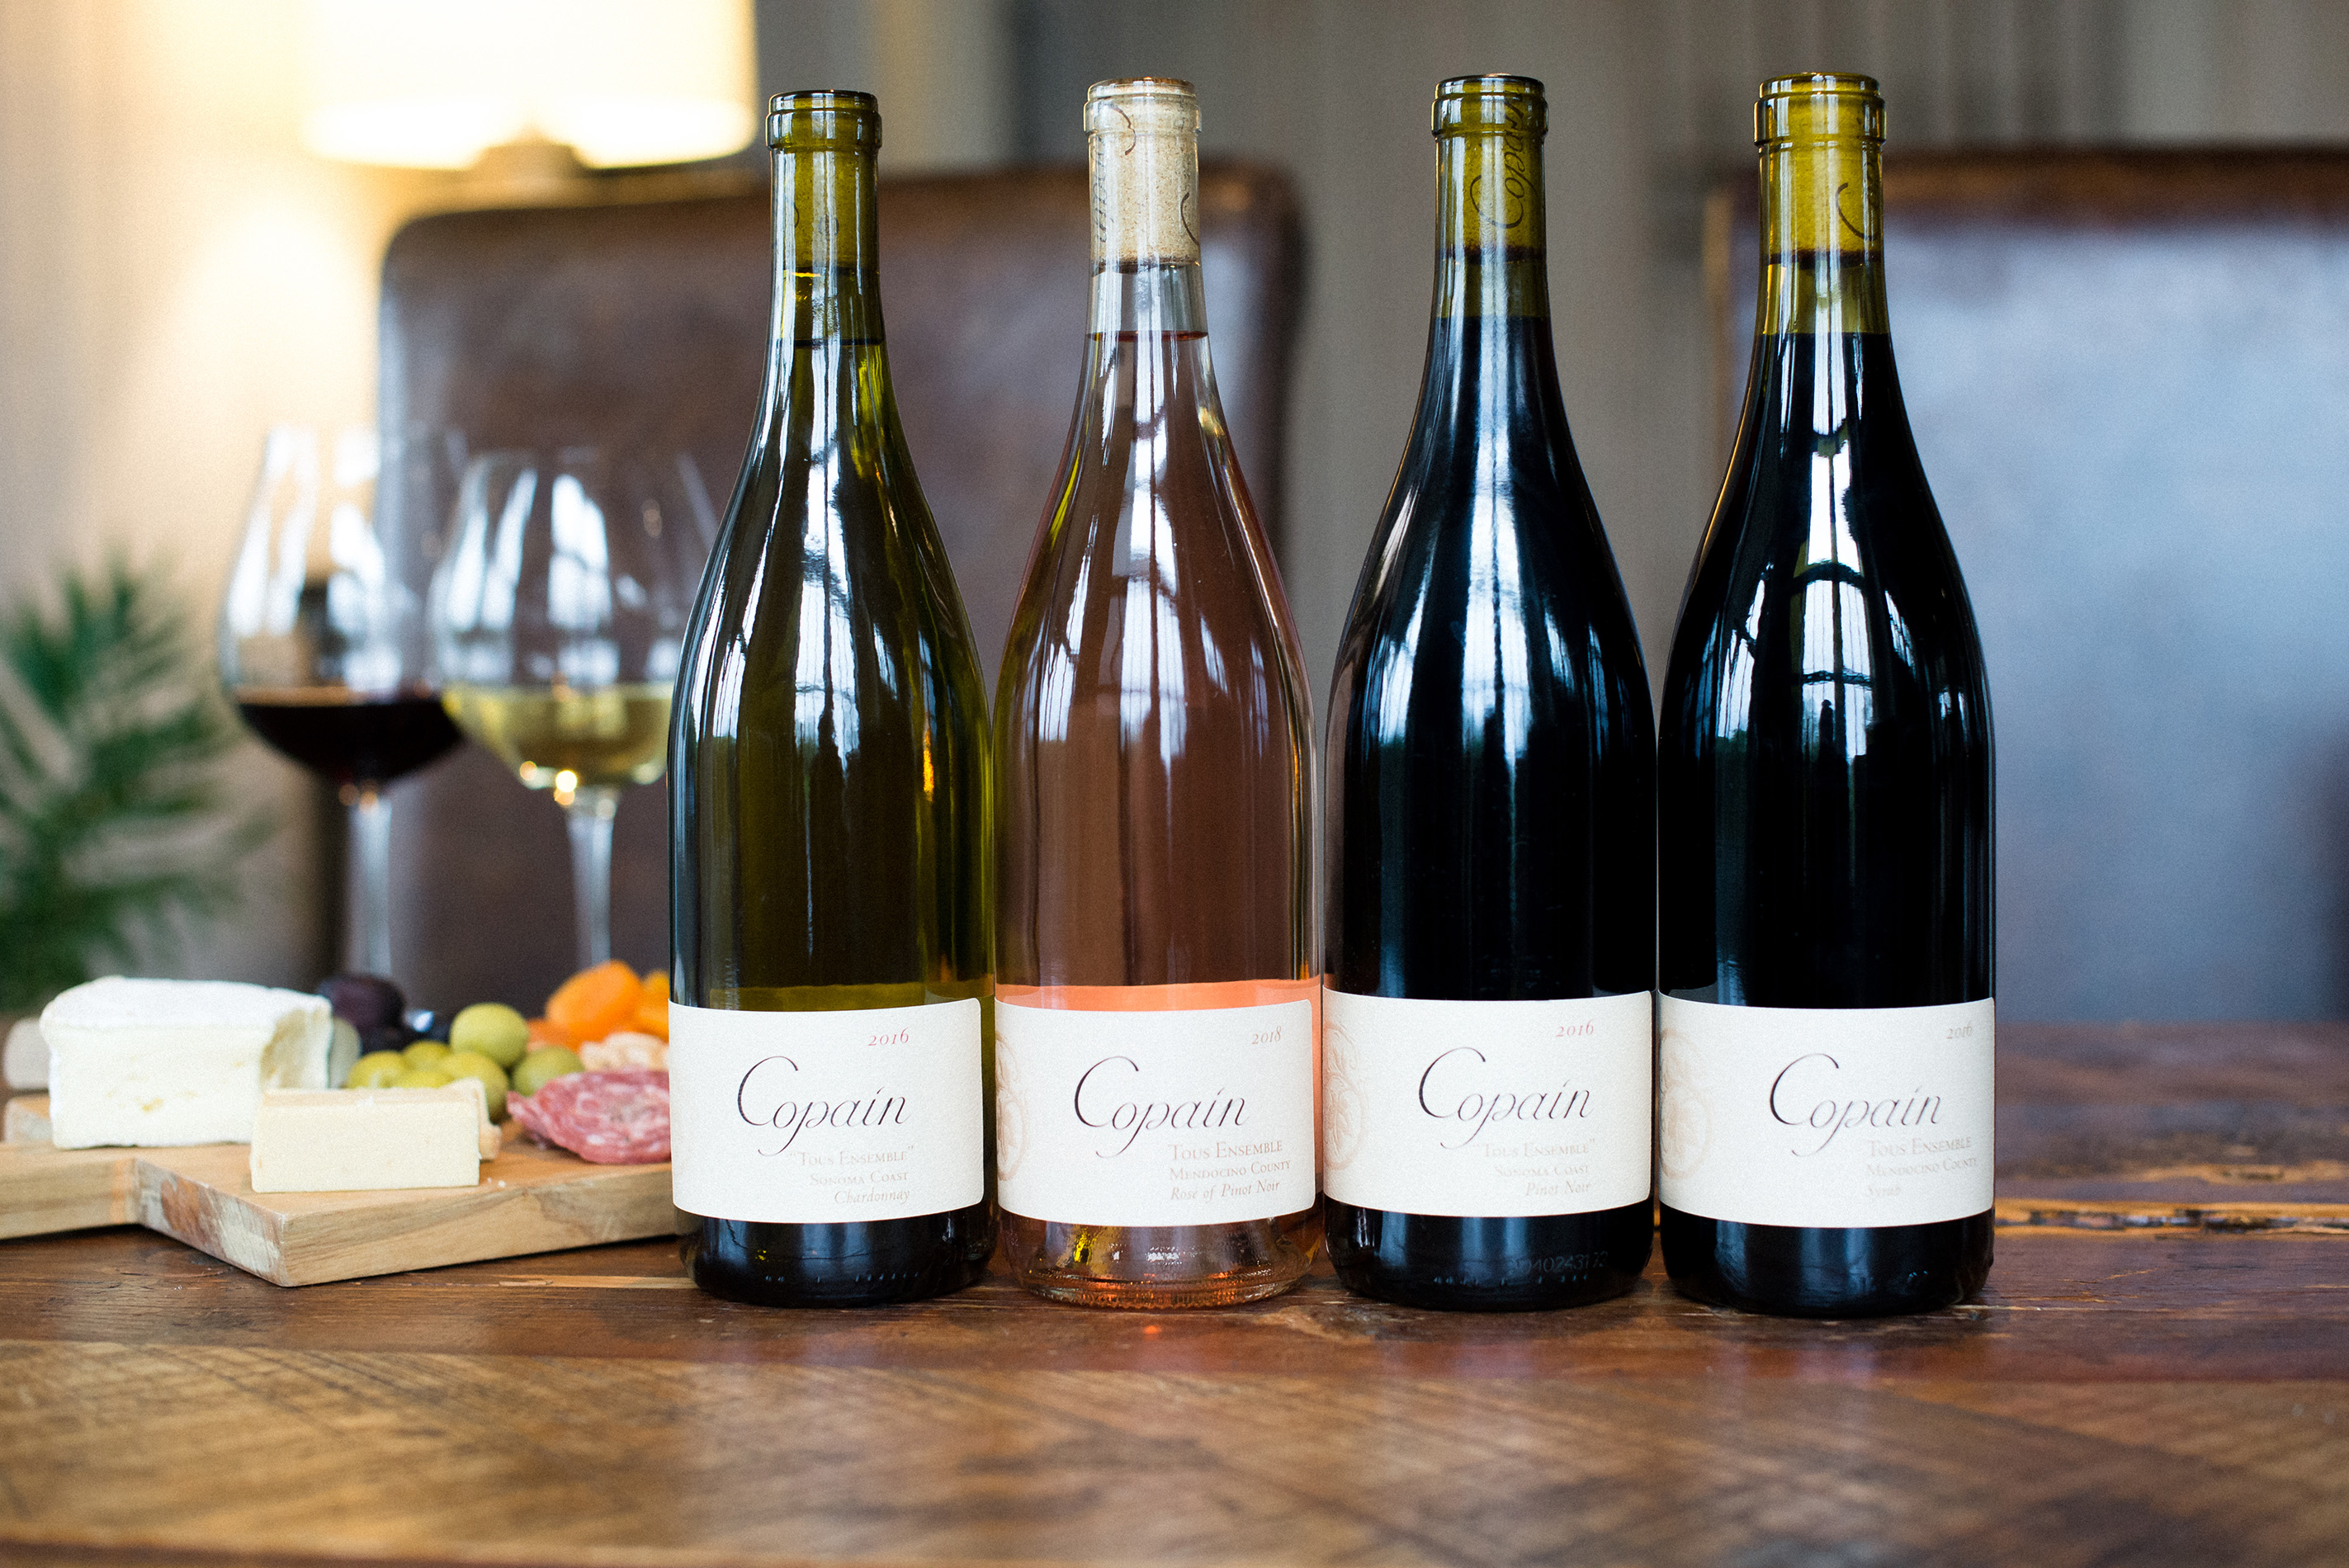 Four bottles of Copain wine standing side by side.